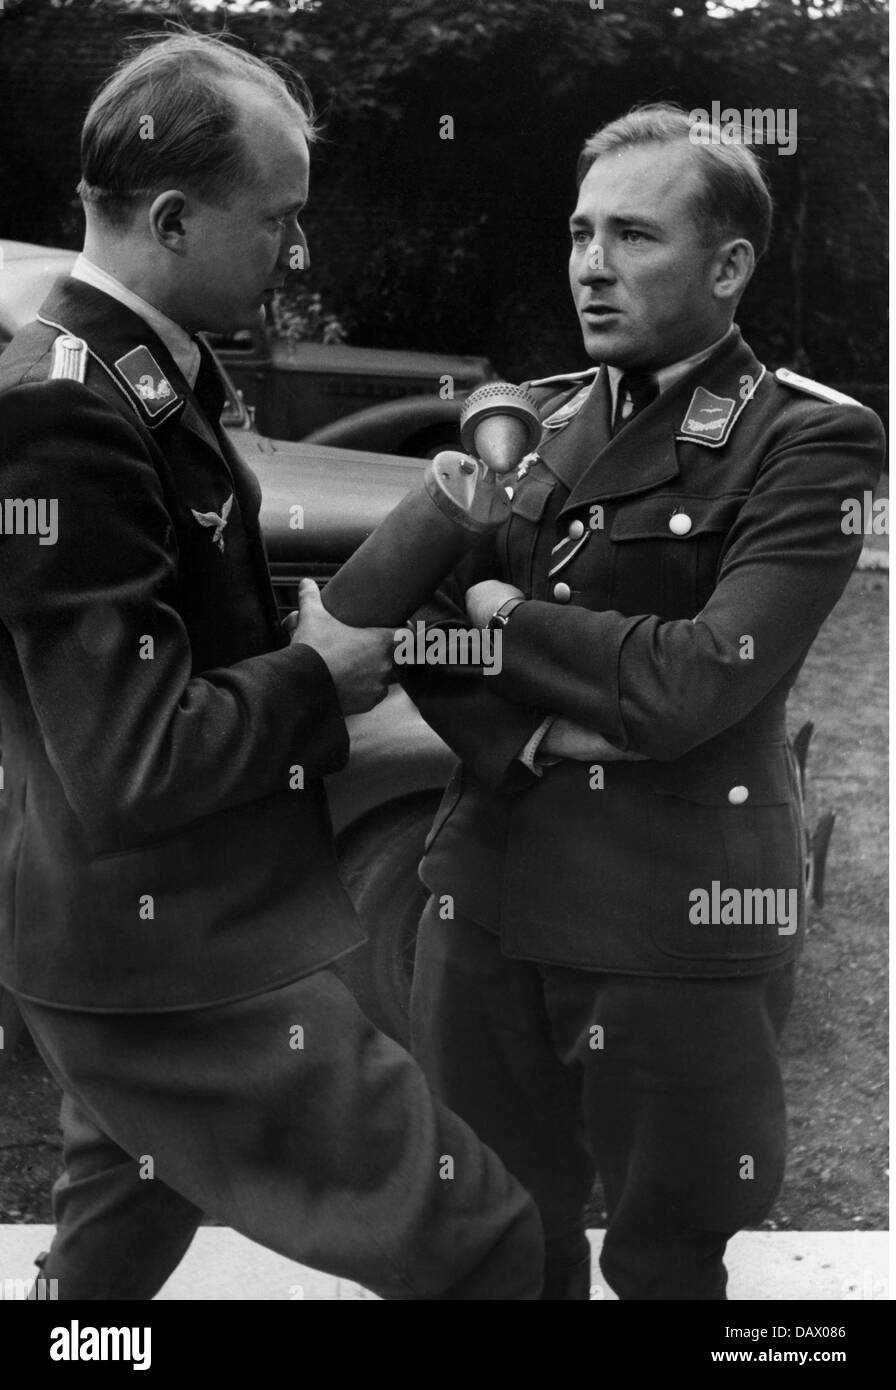 events, Second World War / WWII, aerial warfare, persons, Luftwaffe war correspondent interviewing a pilot, 1939 / 1940, Additional-Rights-Clearences-Not Available Stock Photo